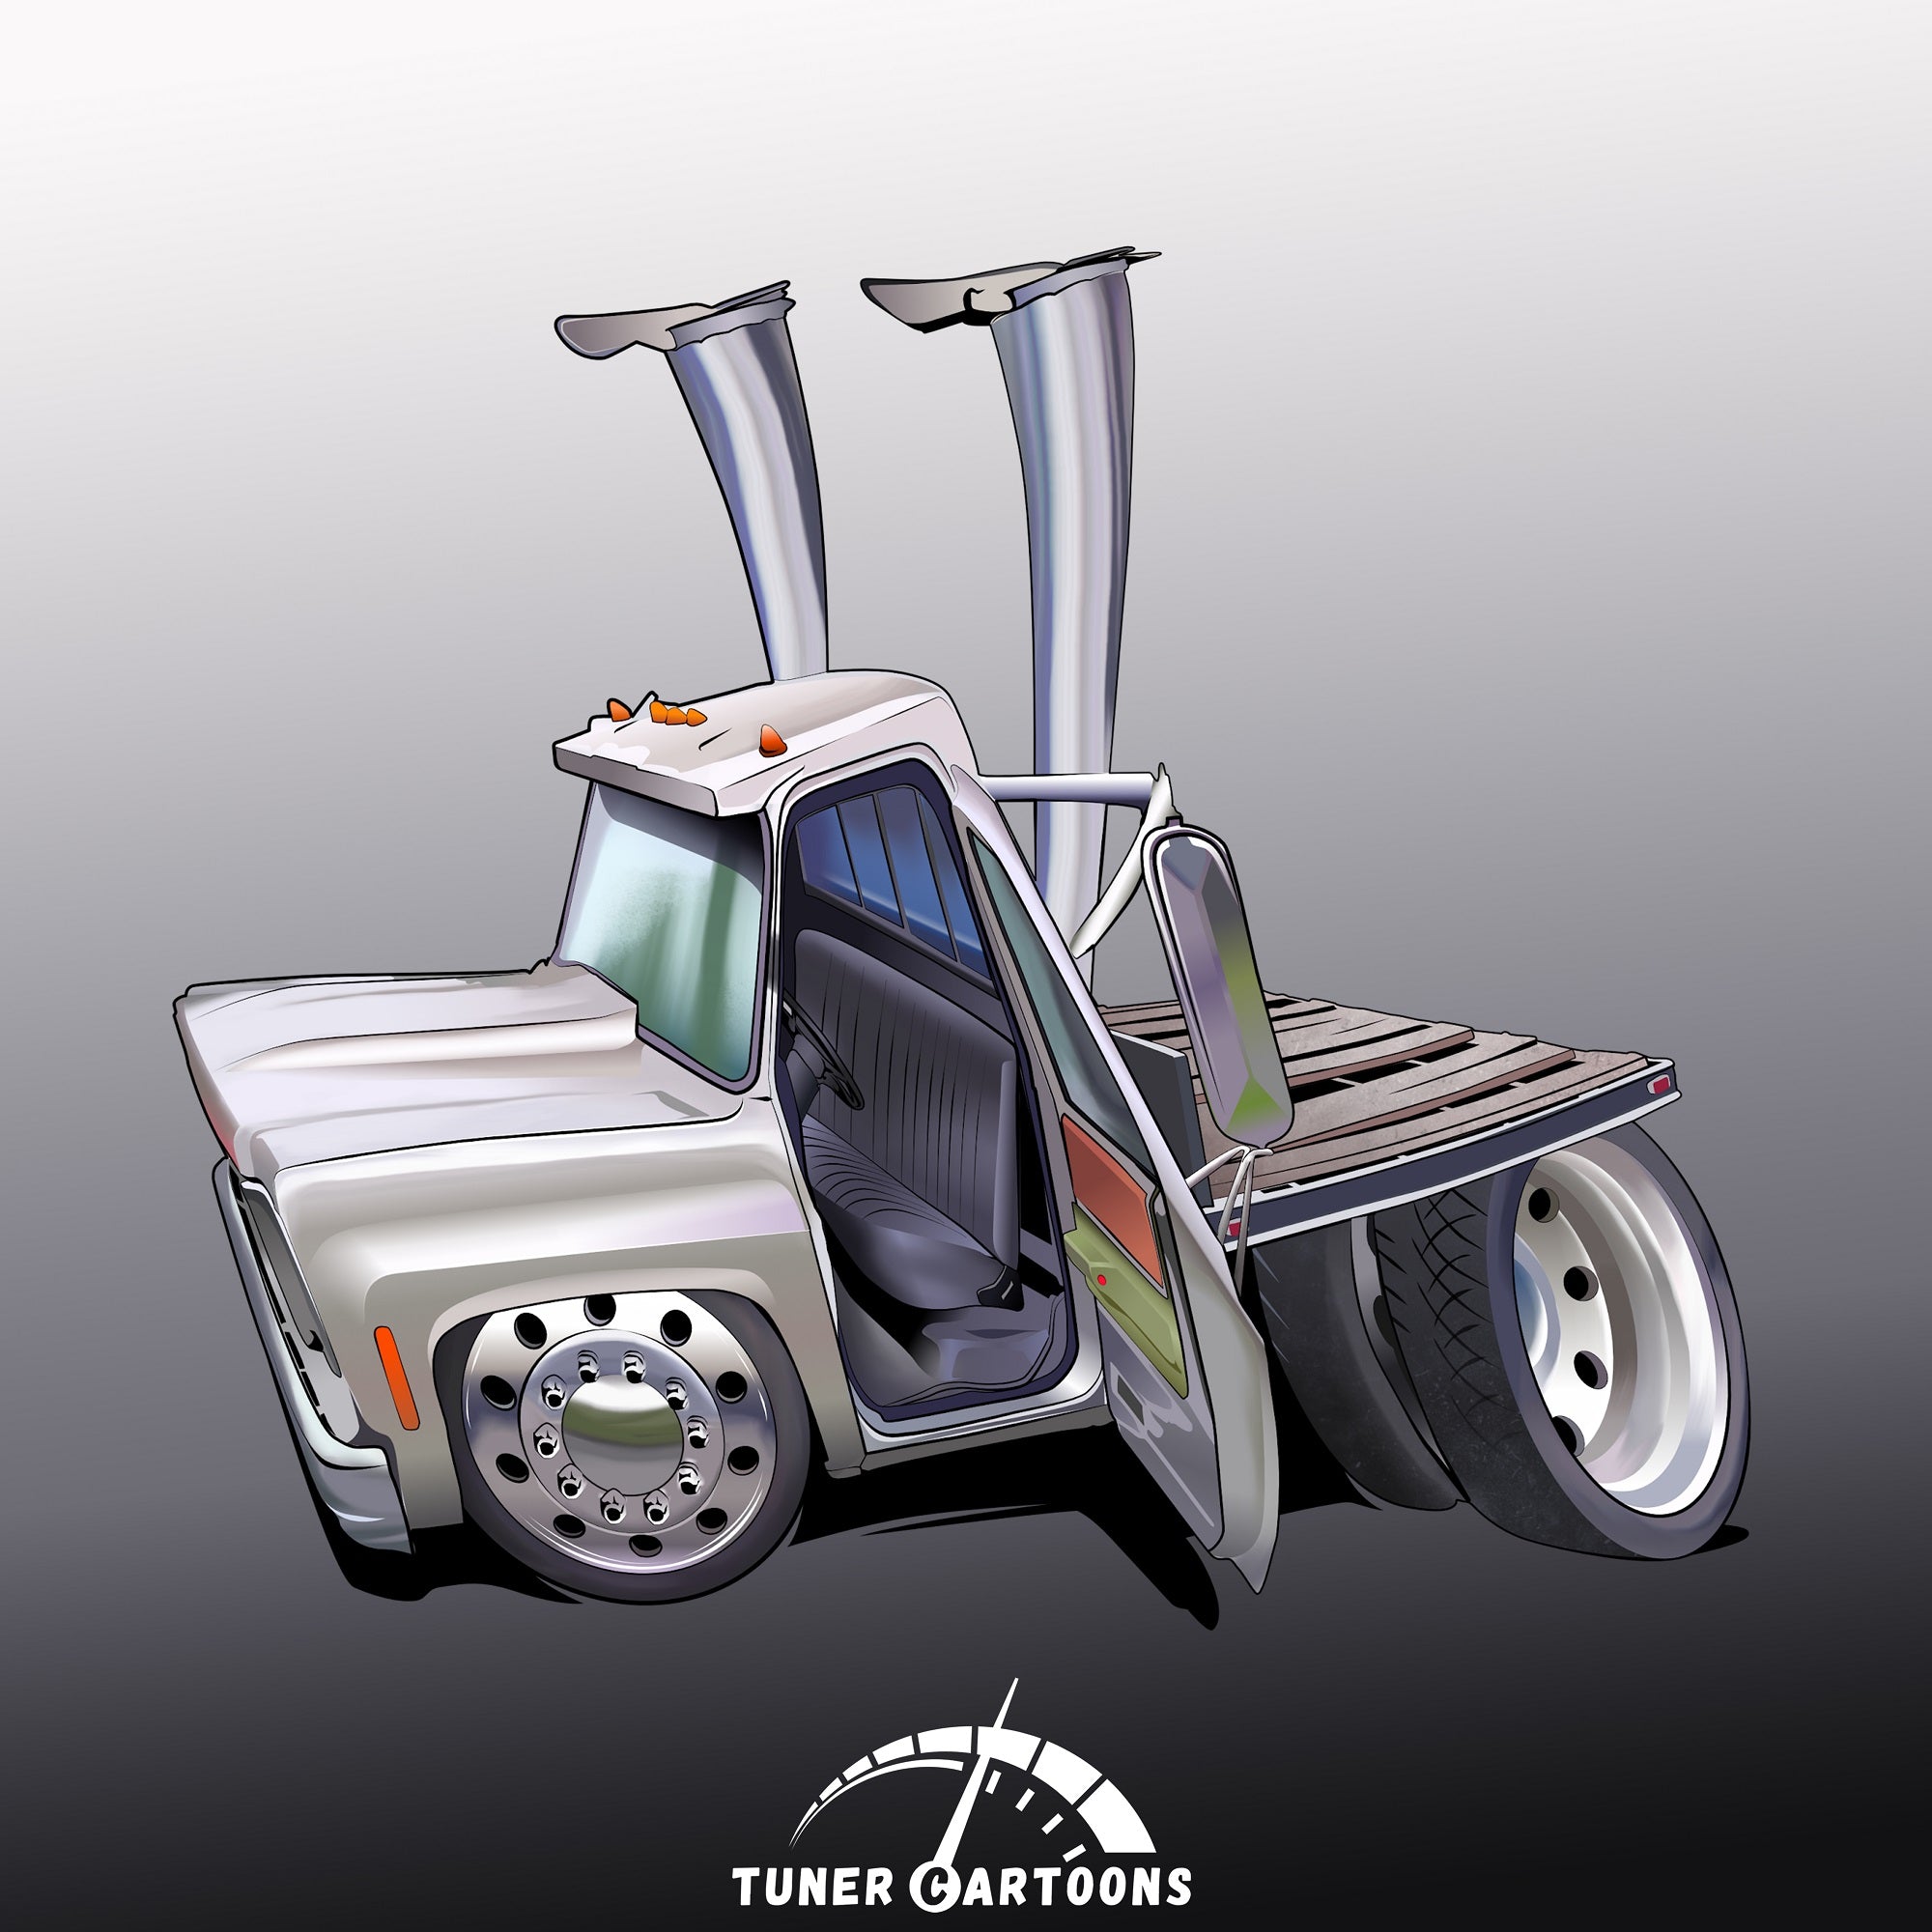 Baby Truck Cartoon With a Custom Character